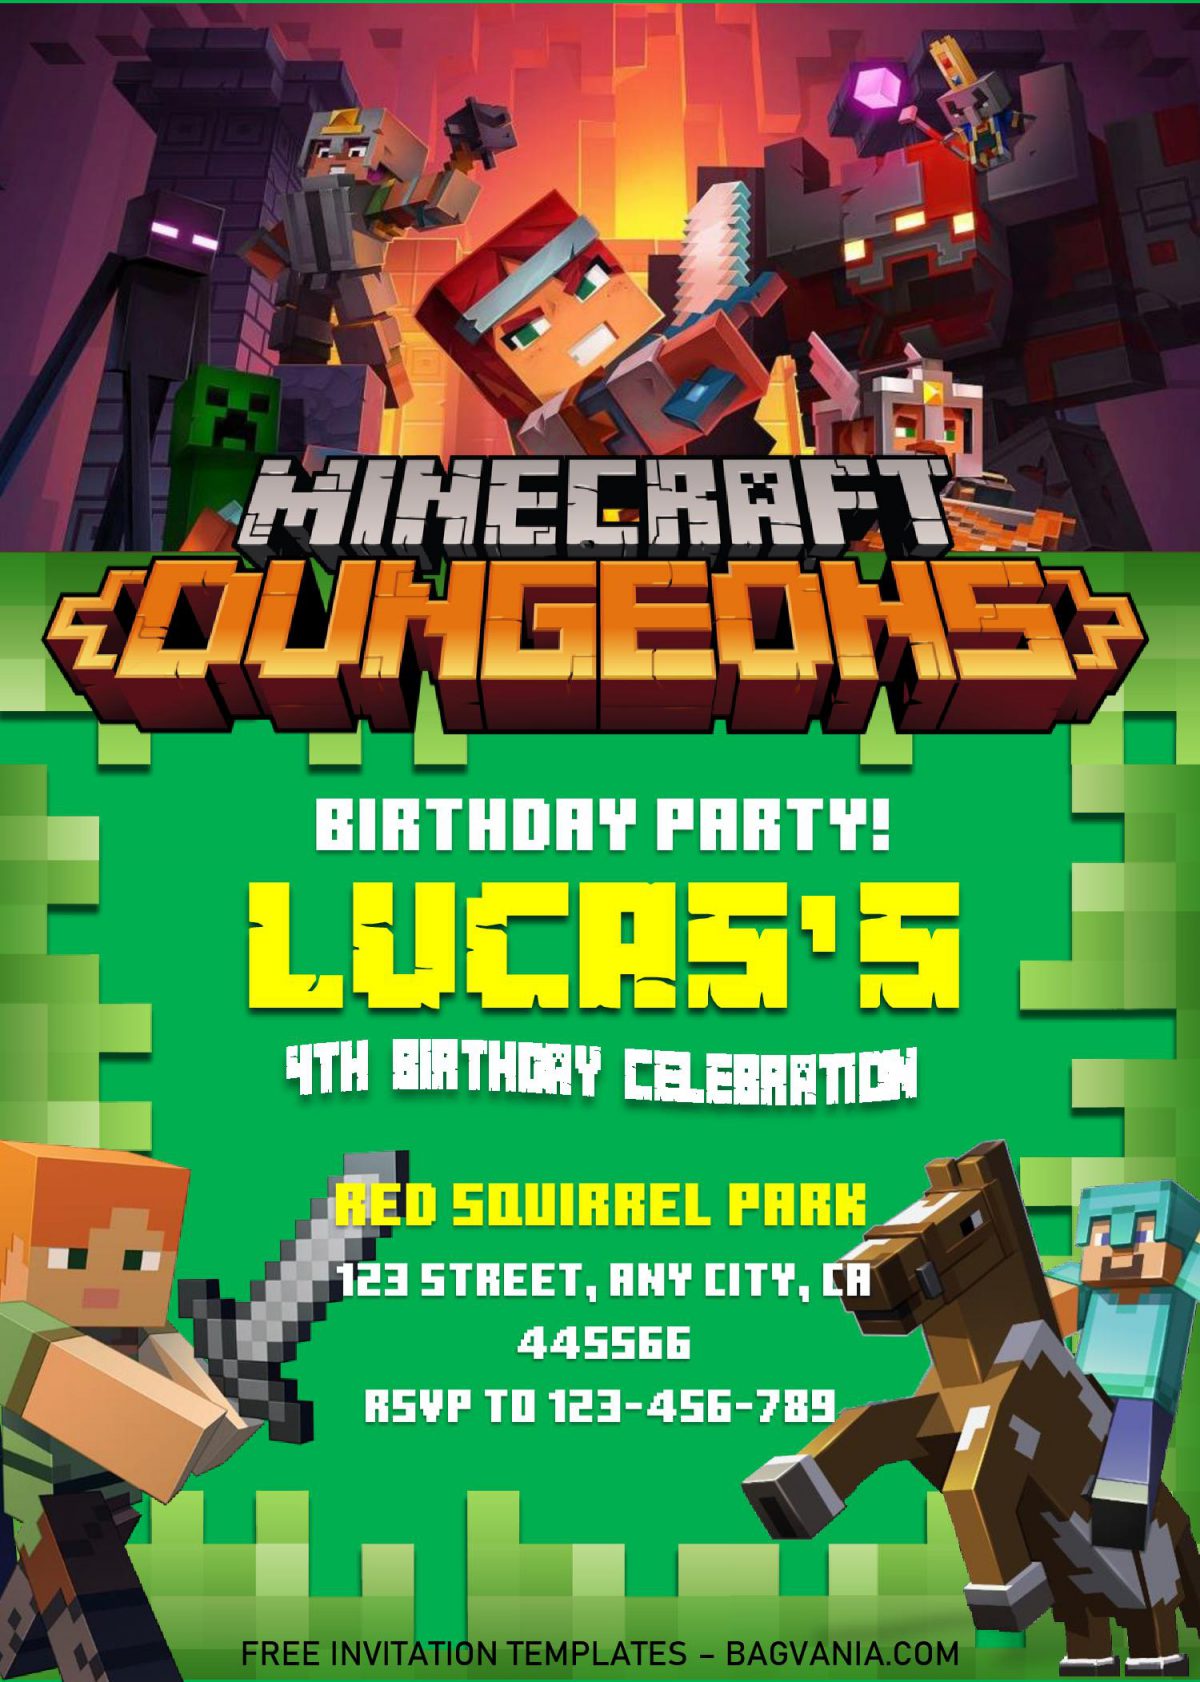 Minecraft Birthday Invitation Templates - Editable With MS Word and has minecraft's characters graphics